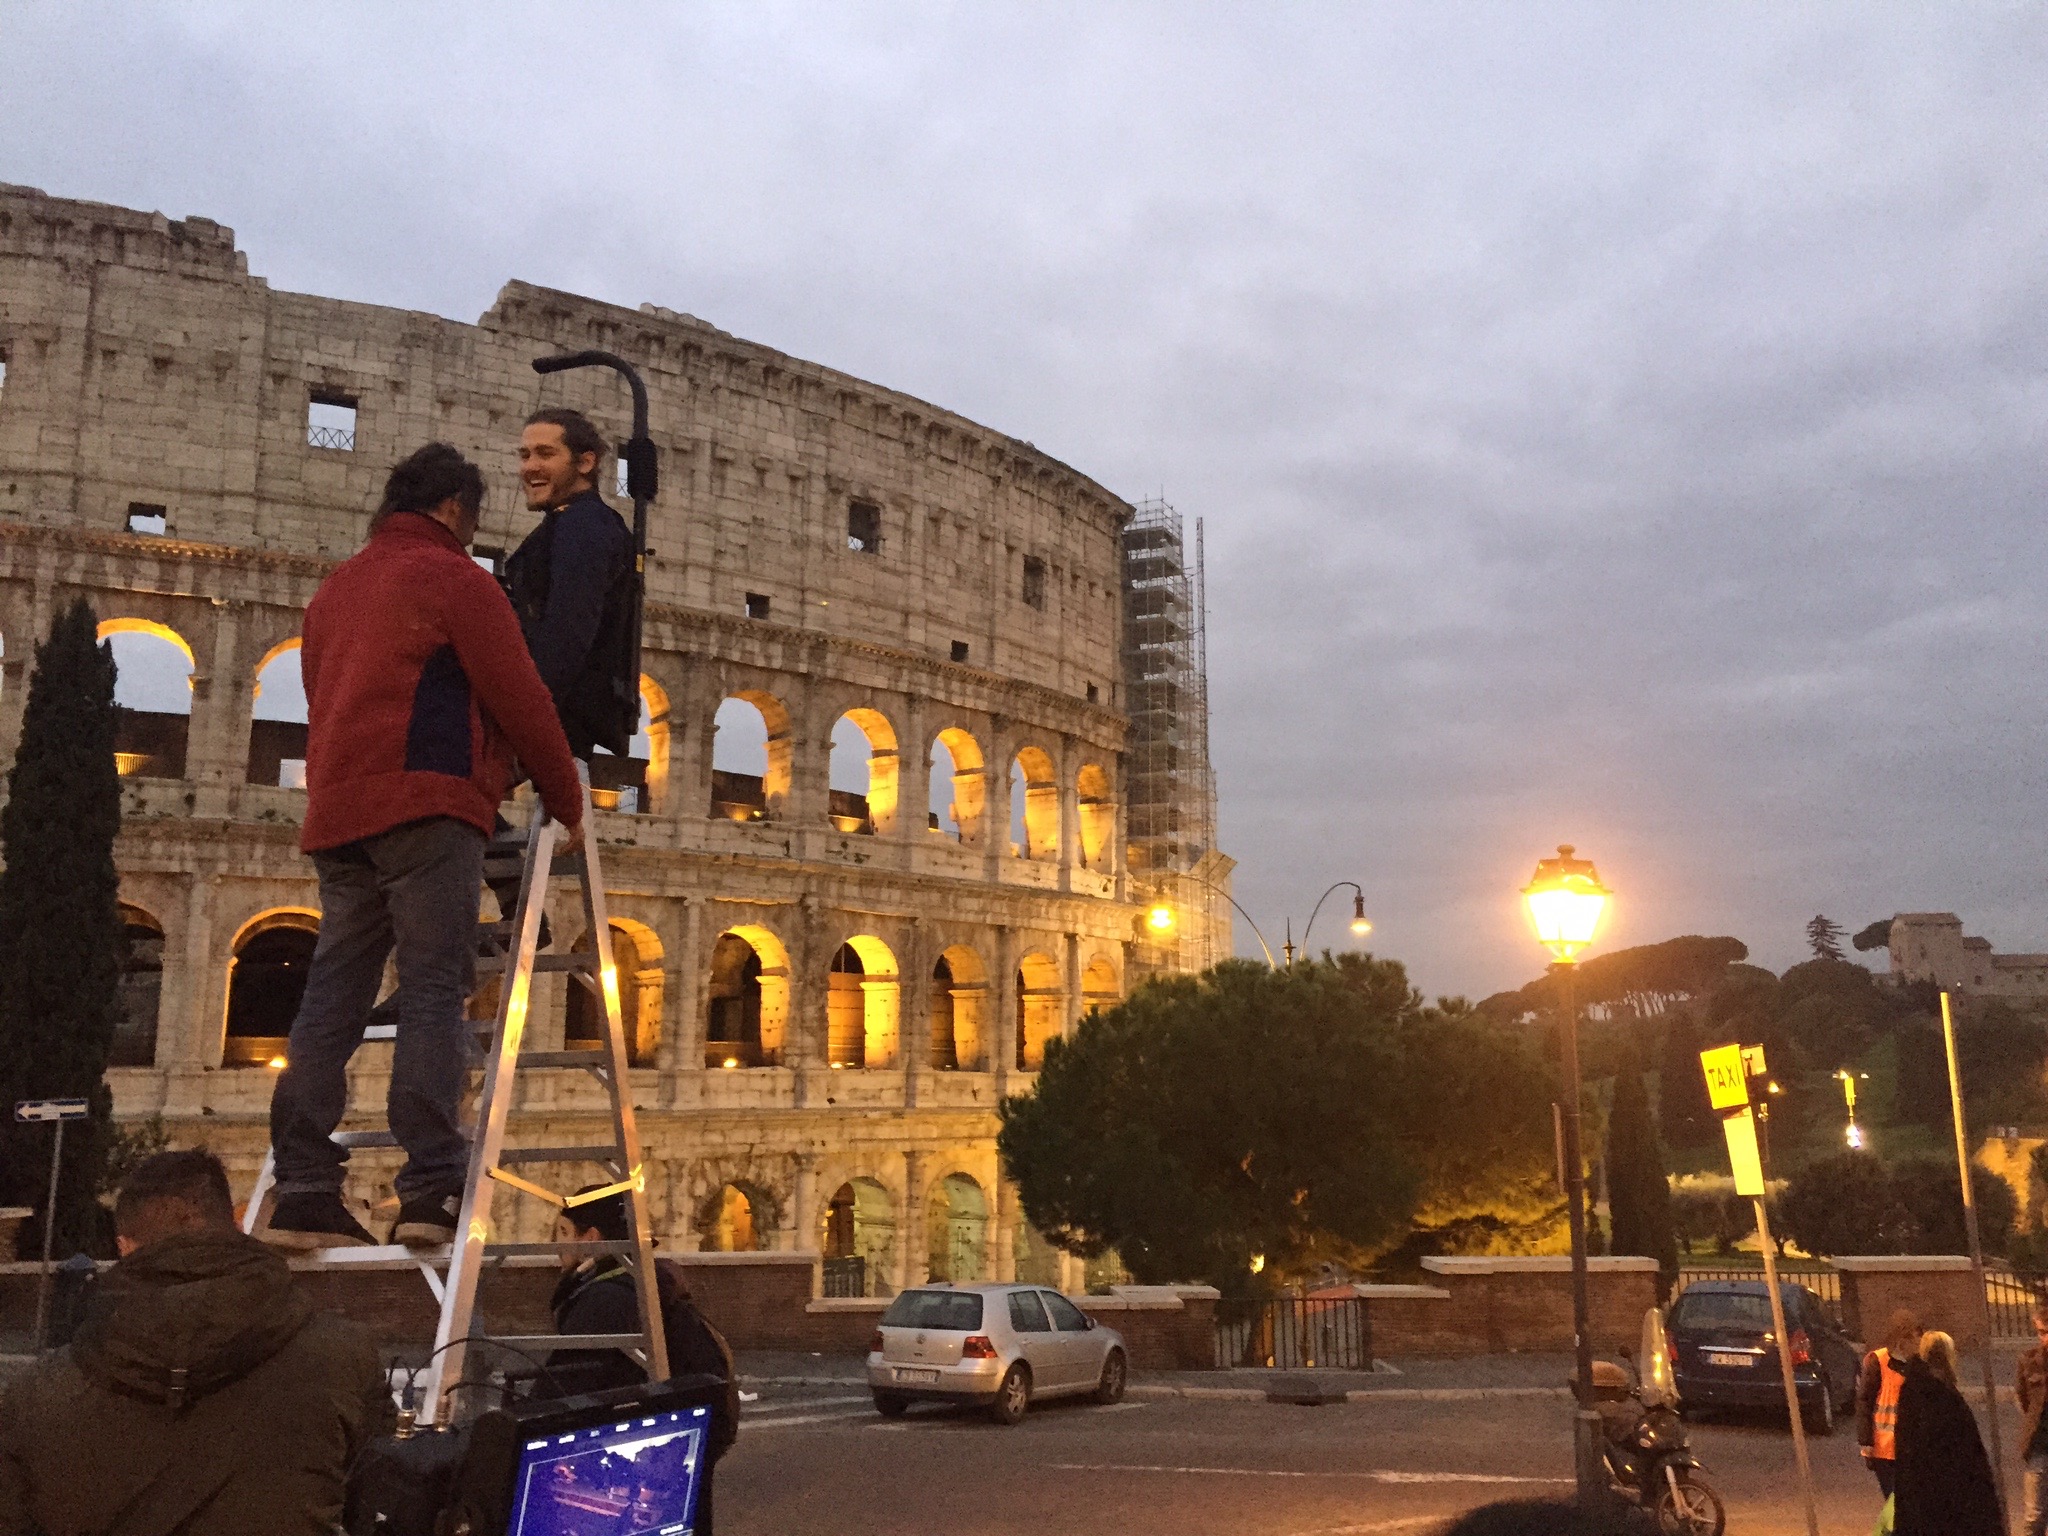 Shooting at the Colosseum in Rome, on the set of 